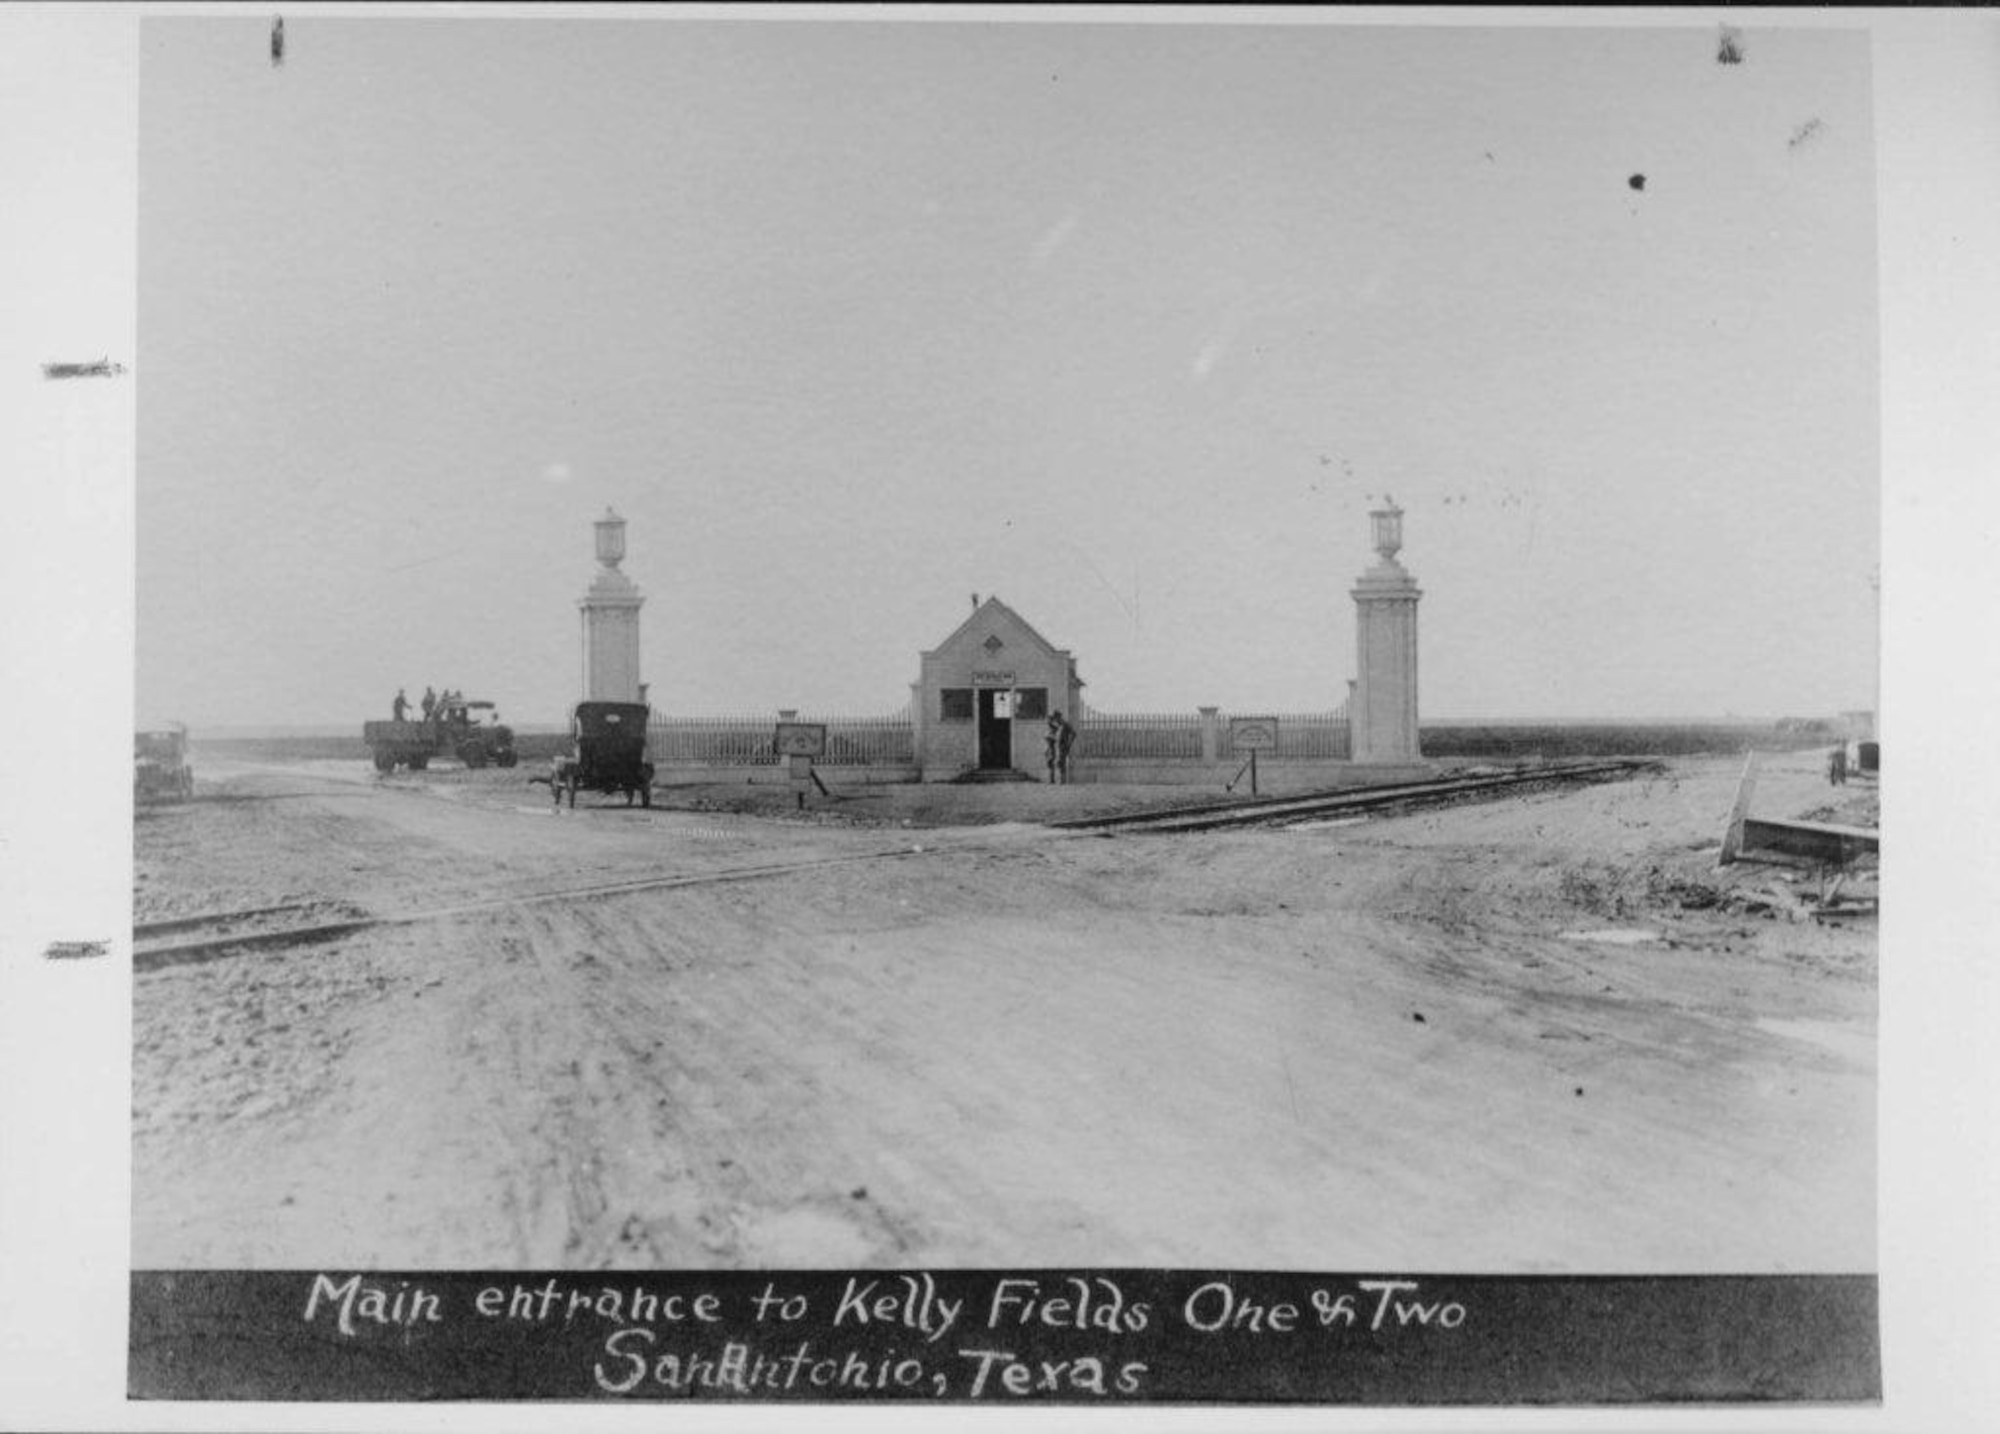 Kelly Air Force Base was established in 1916, the first military air base in Texas. Used as a military depot and for Air Force training, there was increased emphasis on depot-level maintenance in Post-WWII time period. At Peak, the base employed approximately 30,000 and was the largest industrial complex in South Texas. 
